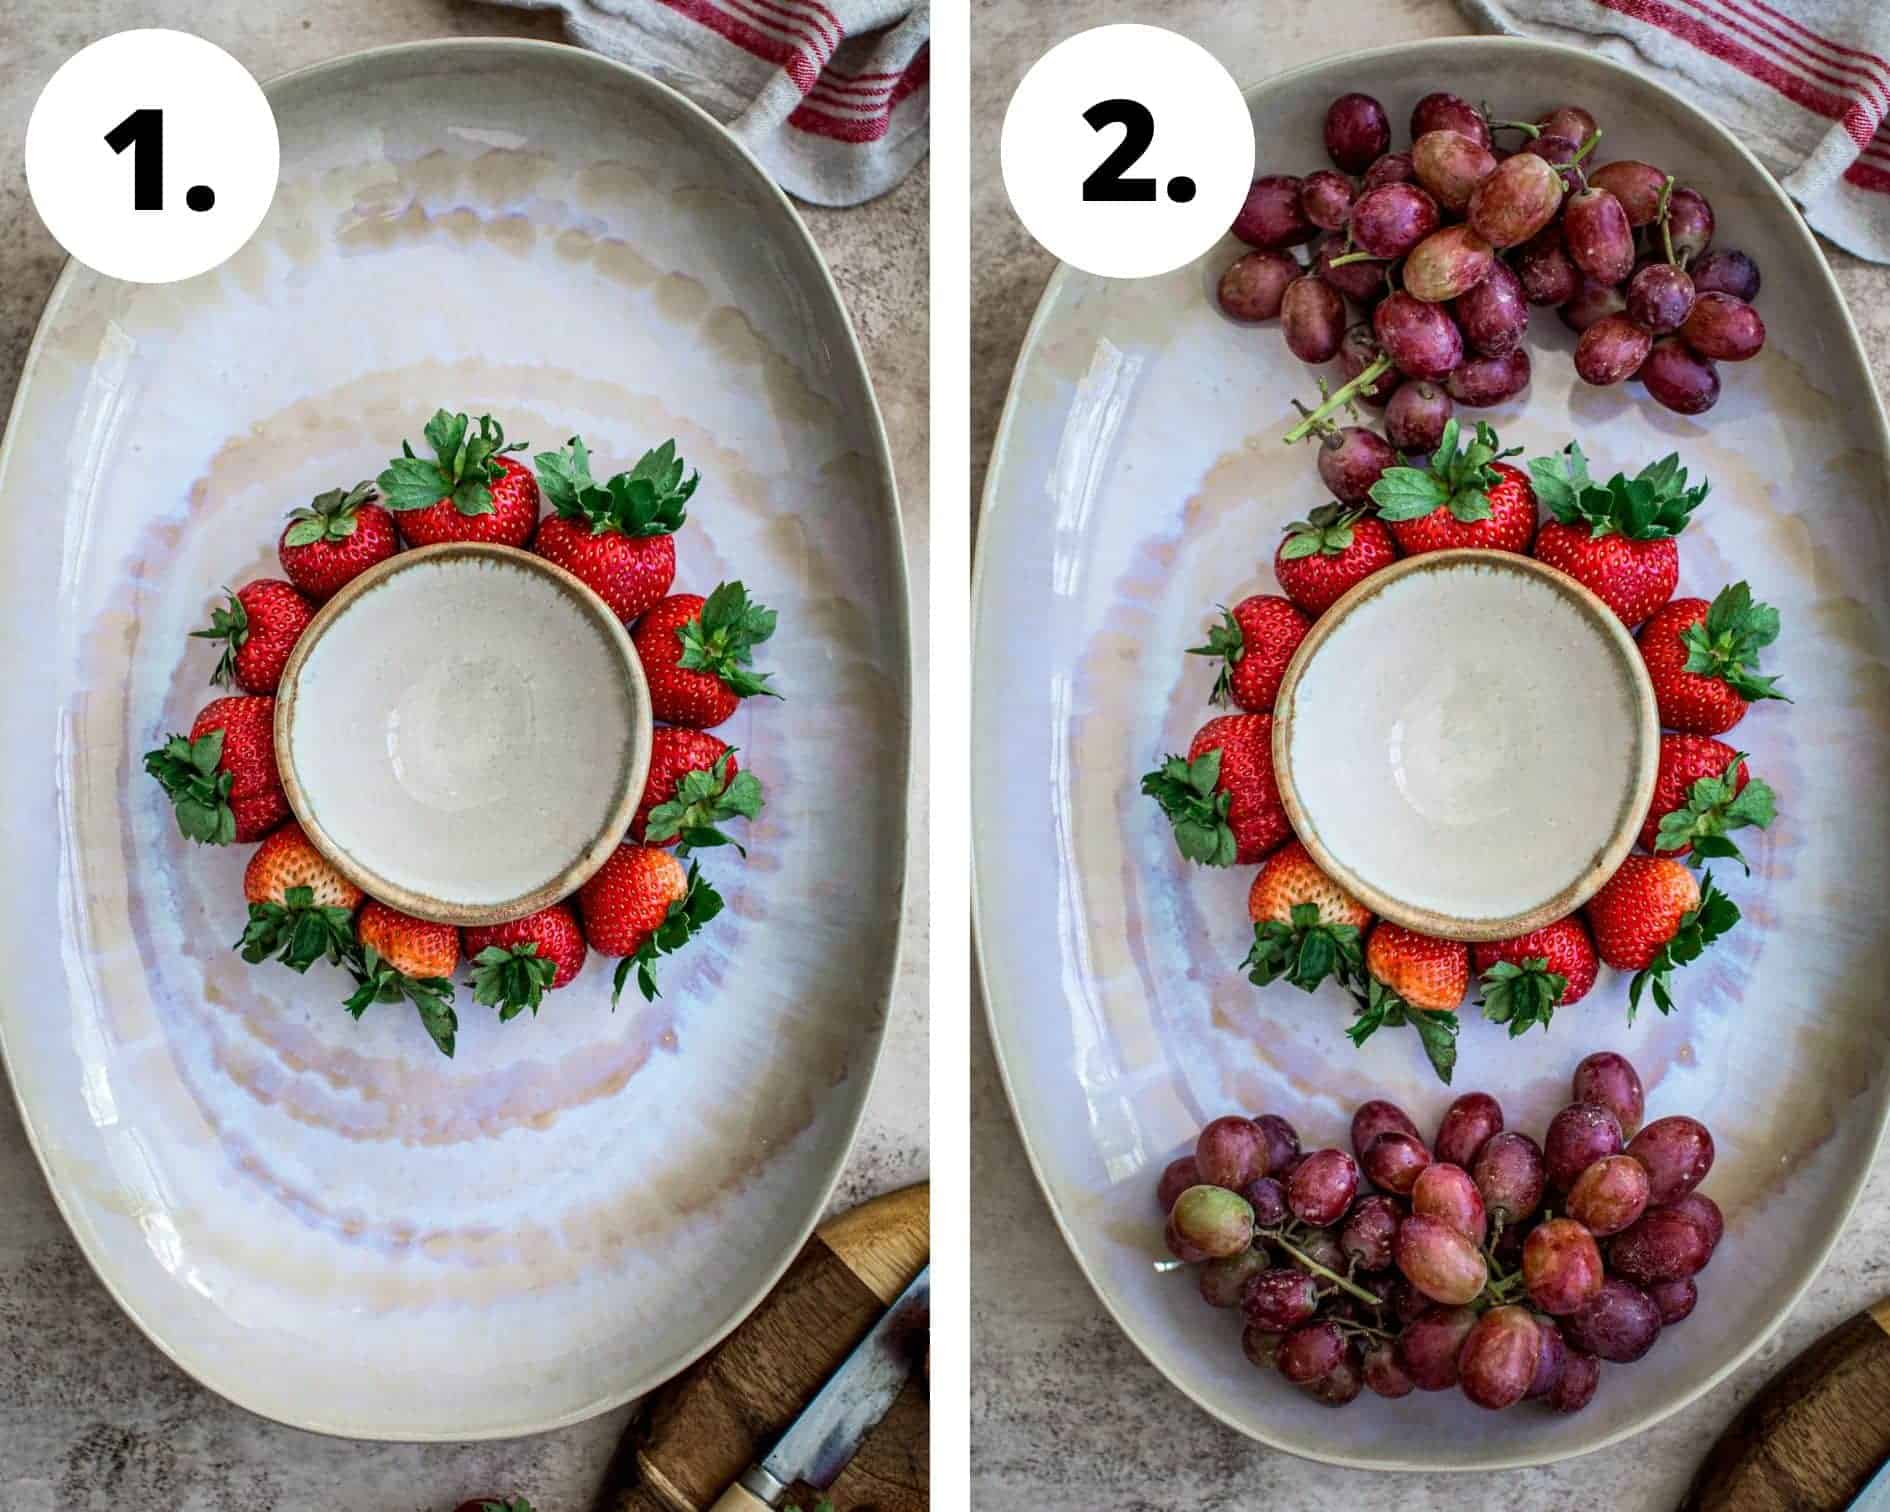 How to make a fruit tray steps 1 and 2.